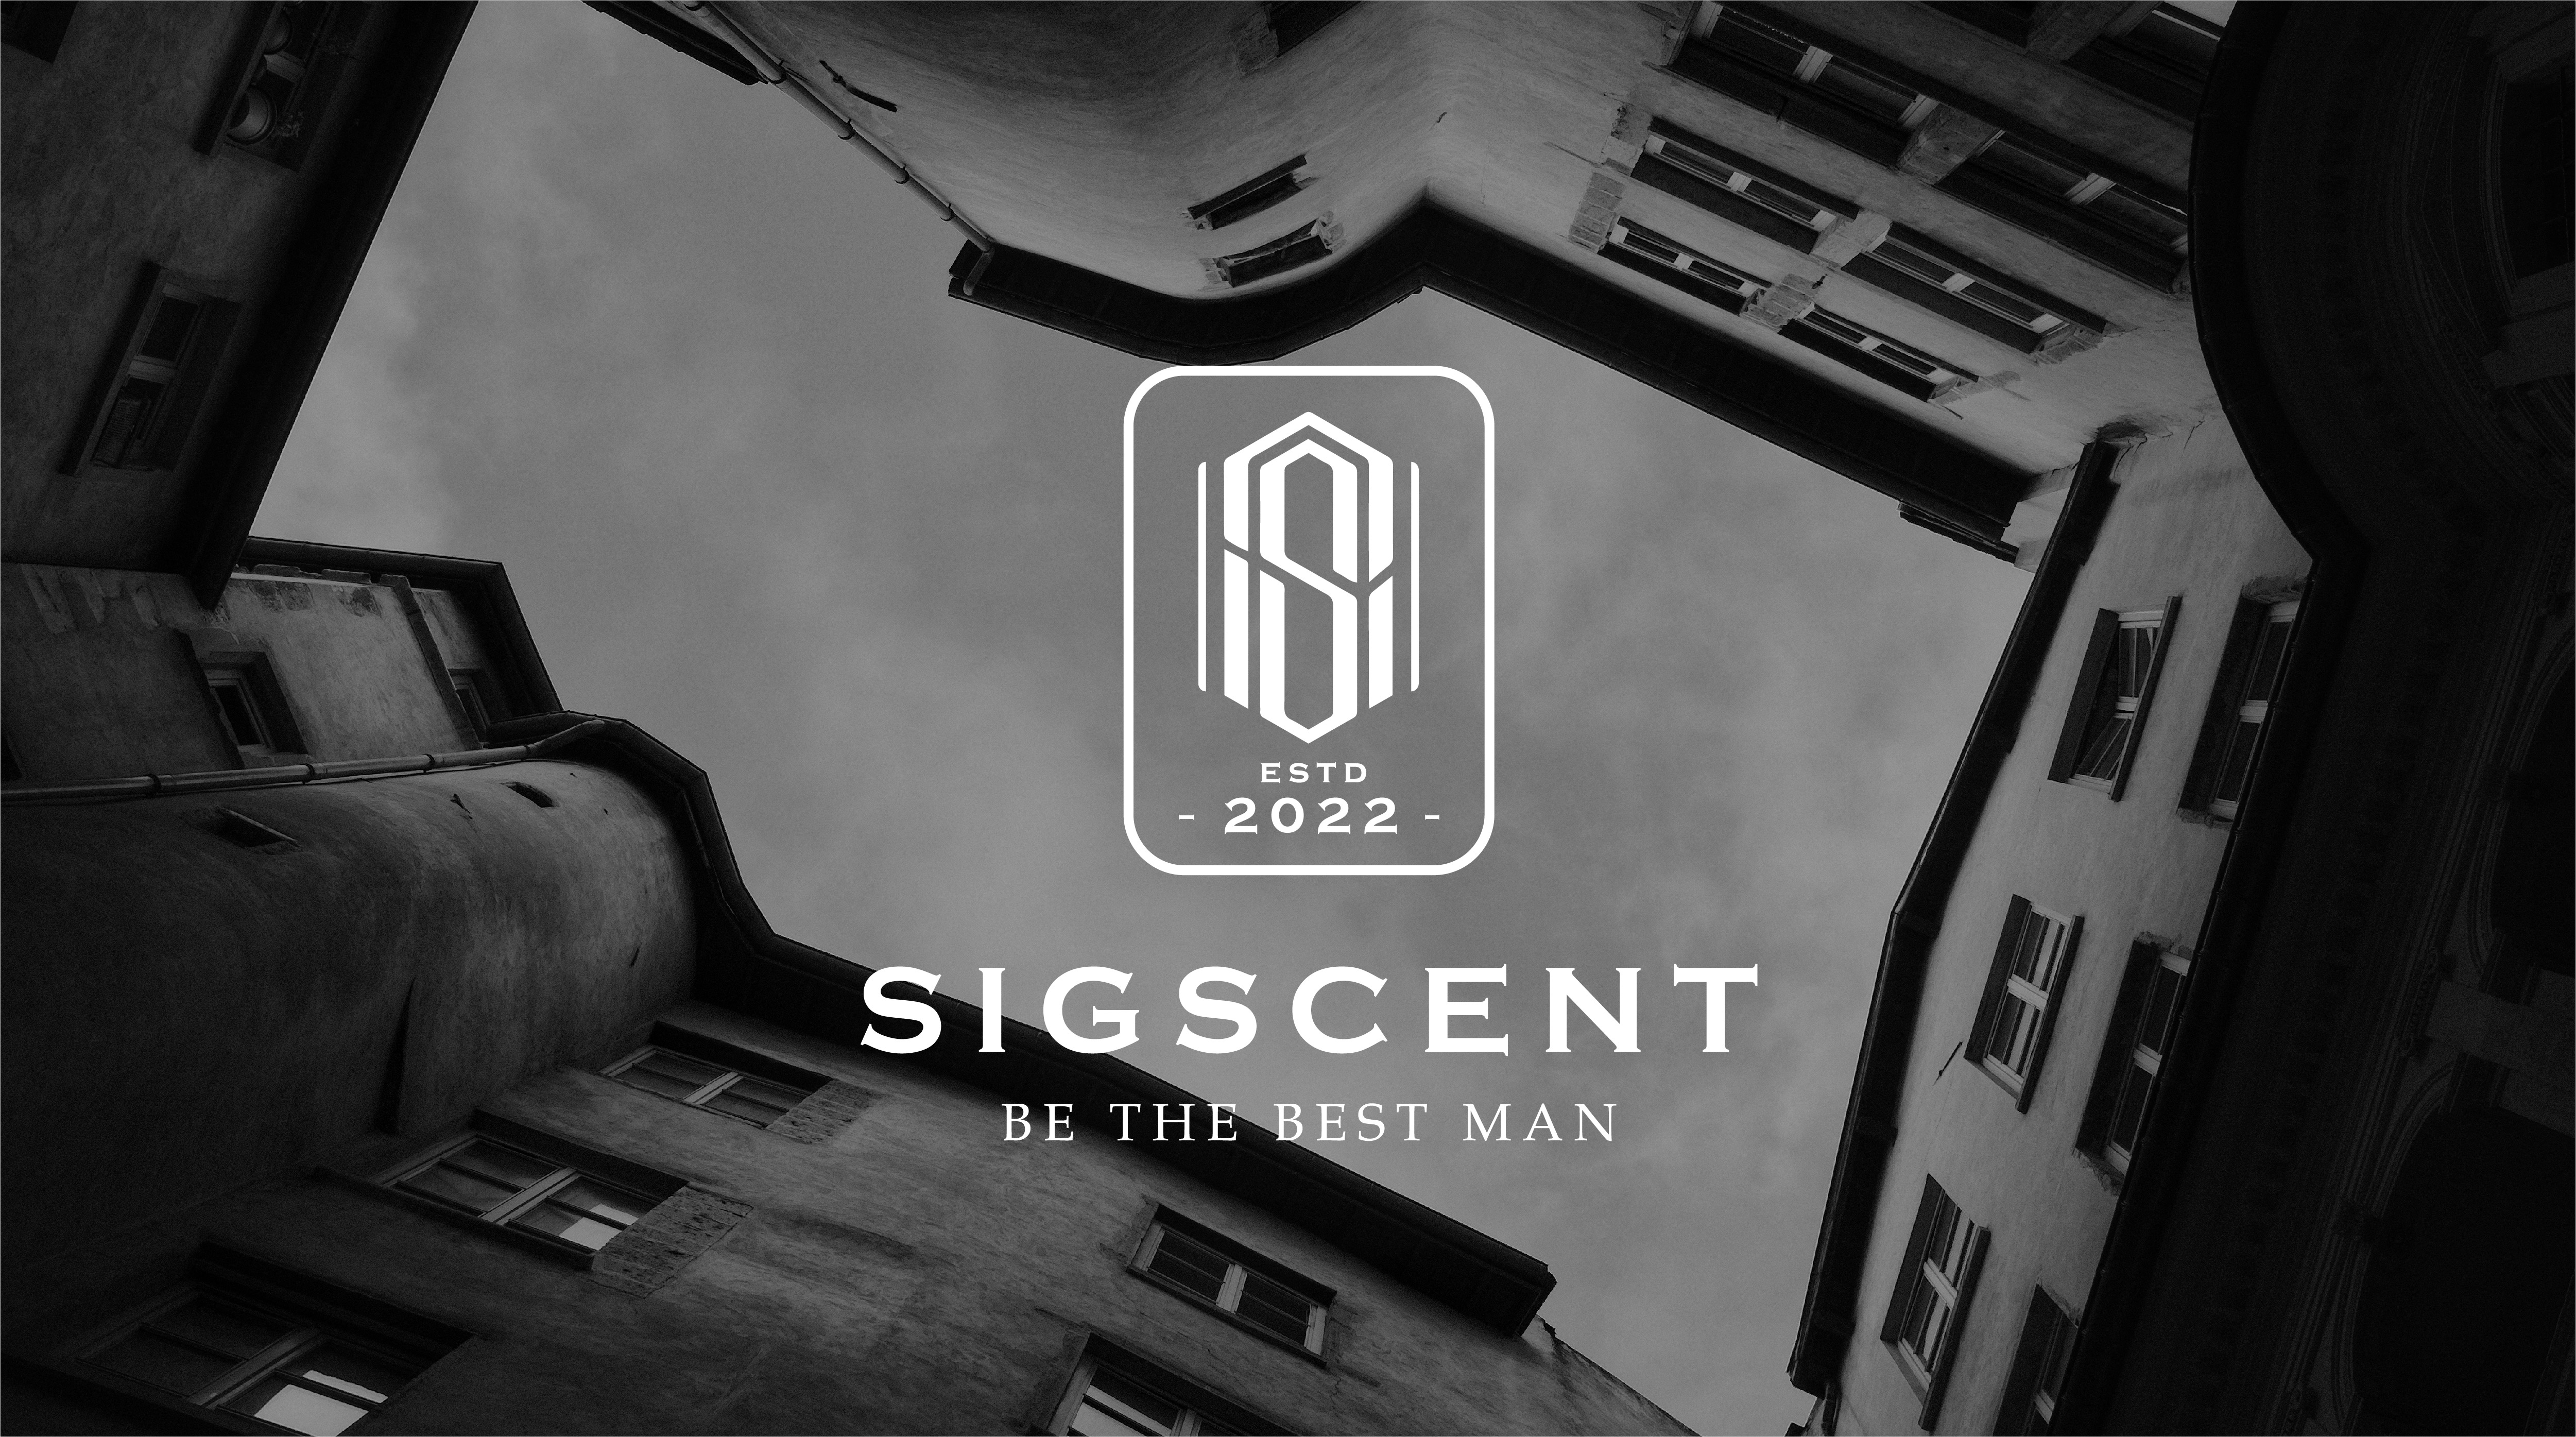 About SIGSCENT